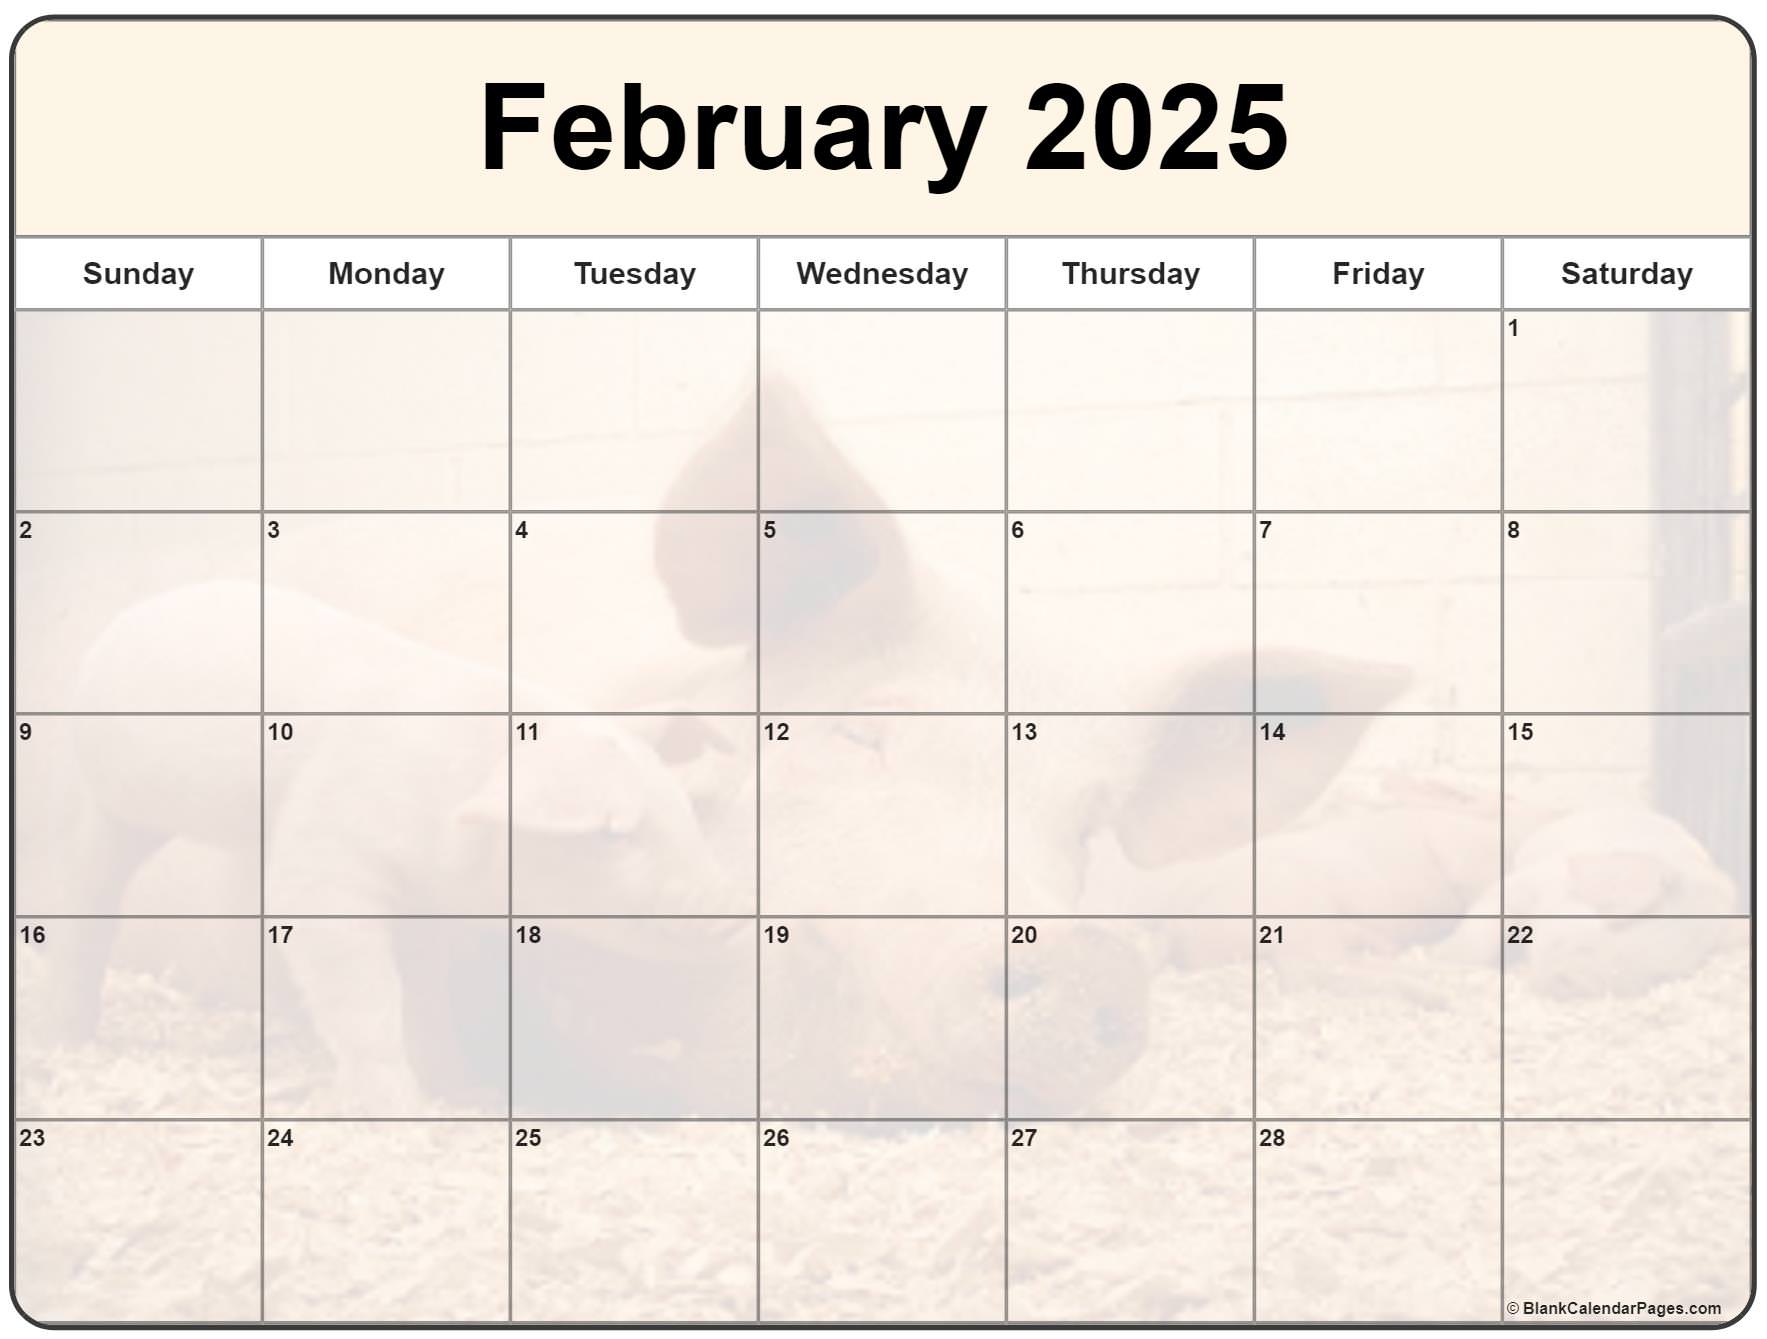 Collection of February 2025 photo calendars with image filters.